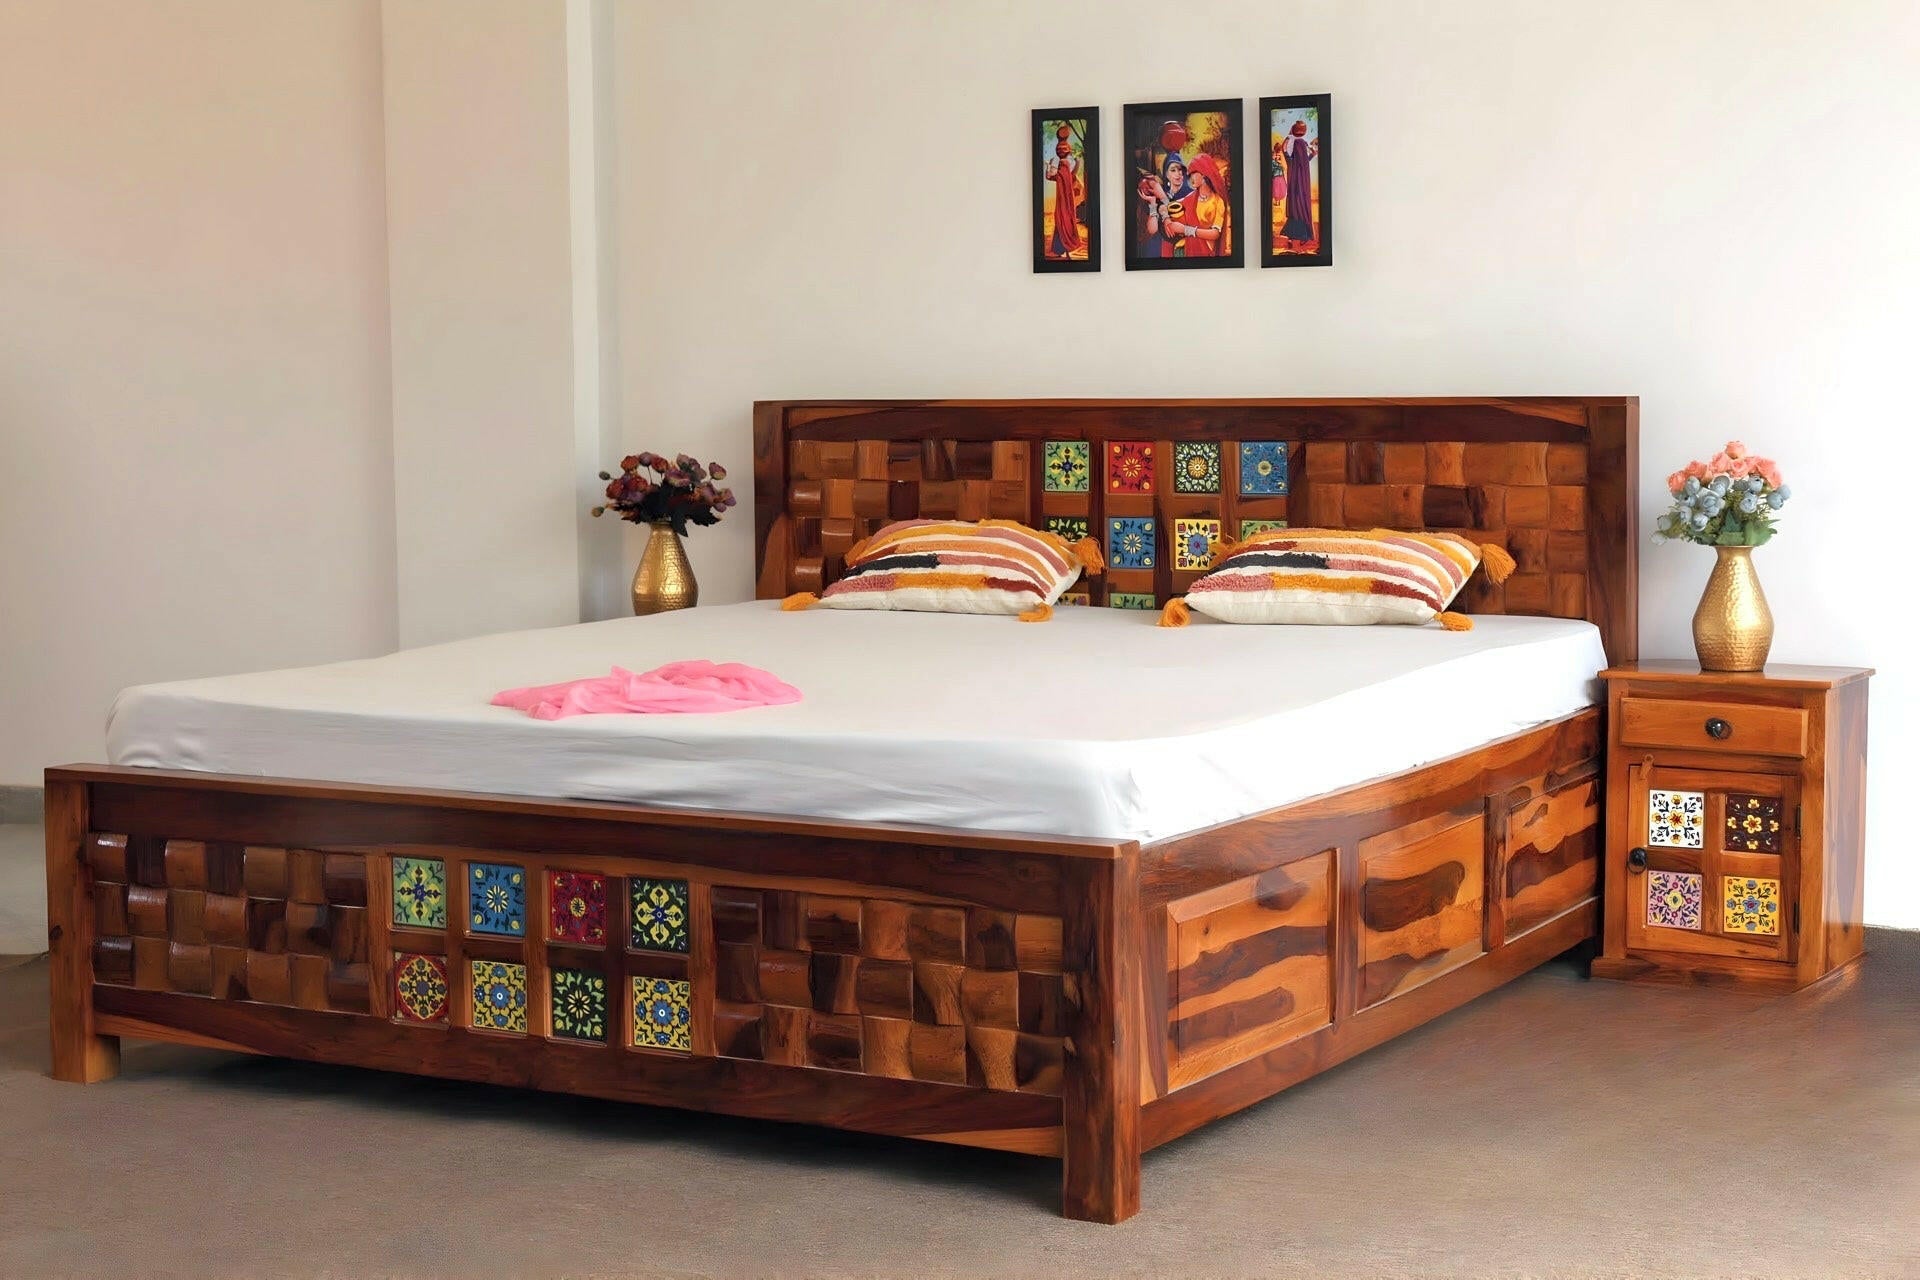 Transform your bedroom with our Tiles Solid Wood Storage Bed, made with sheesham wood and ceramic tiles designs. Shop tradition design wooden beds with storage in Bangalore today !